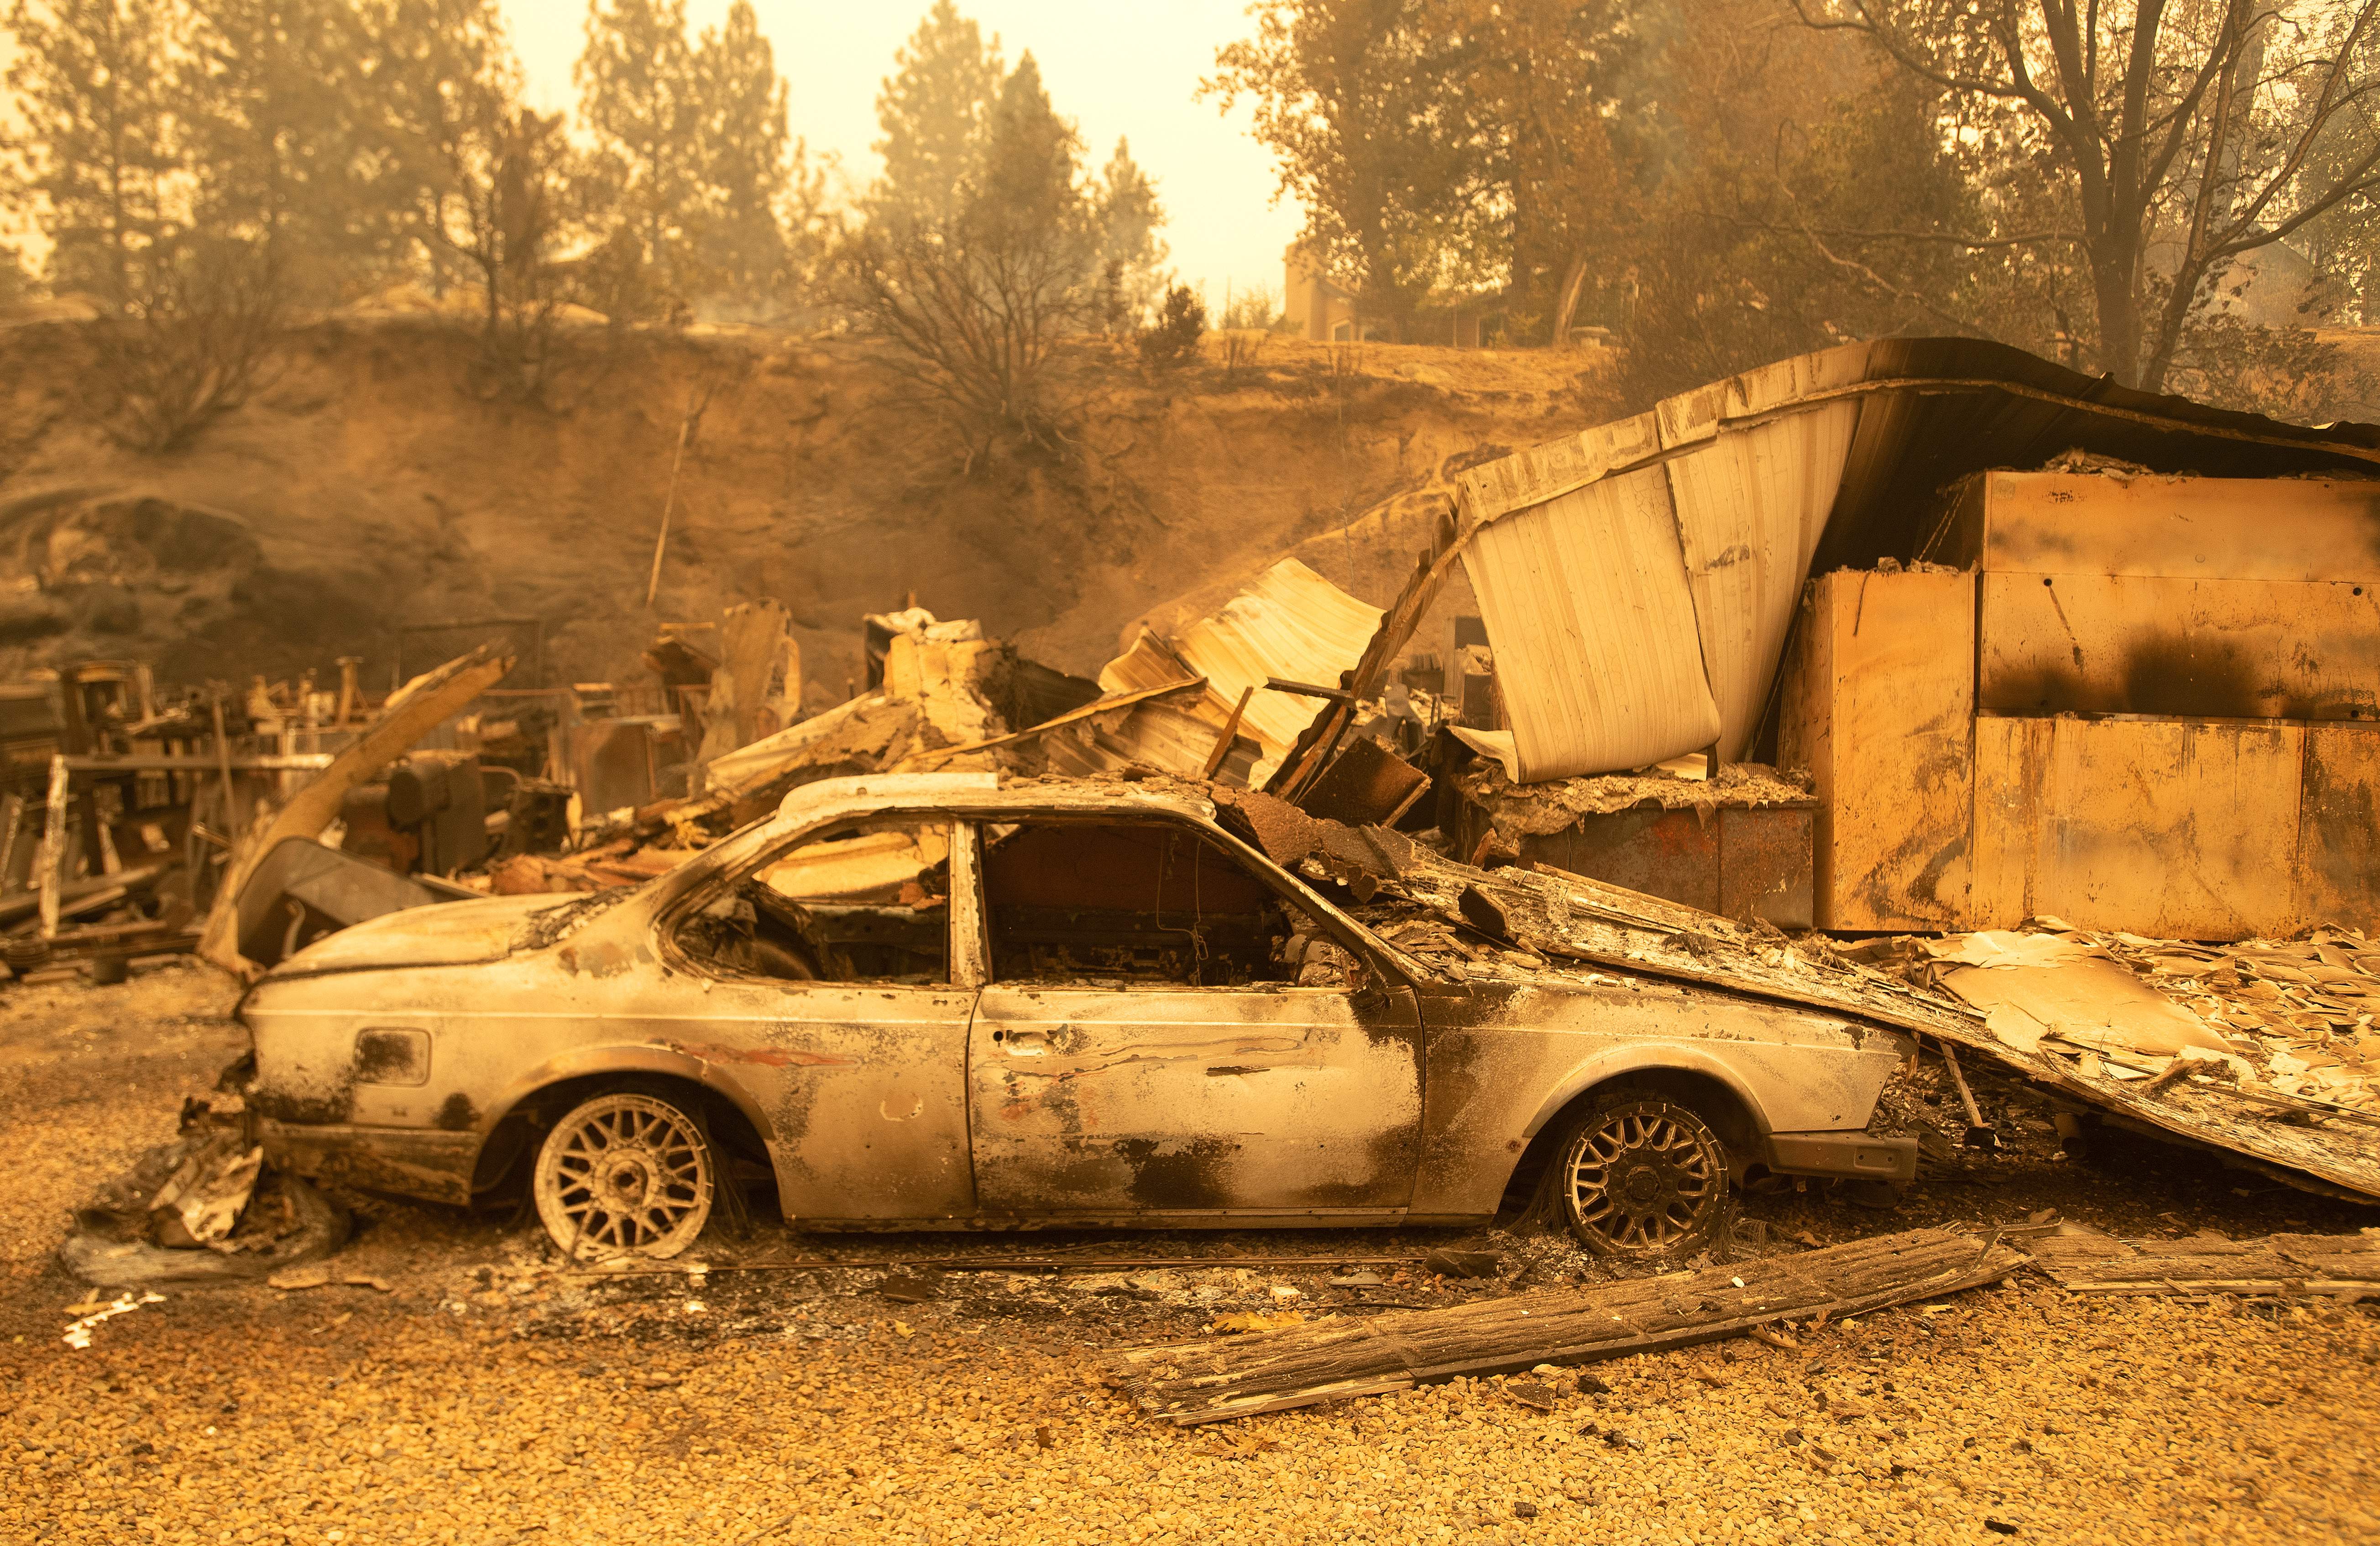 A Look At Some Awesome Classic Cars Destroyed In The California Wildfires